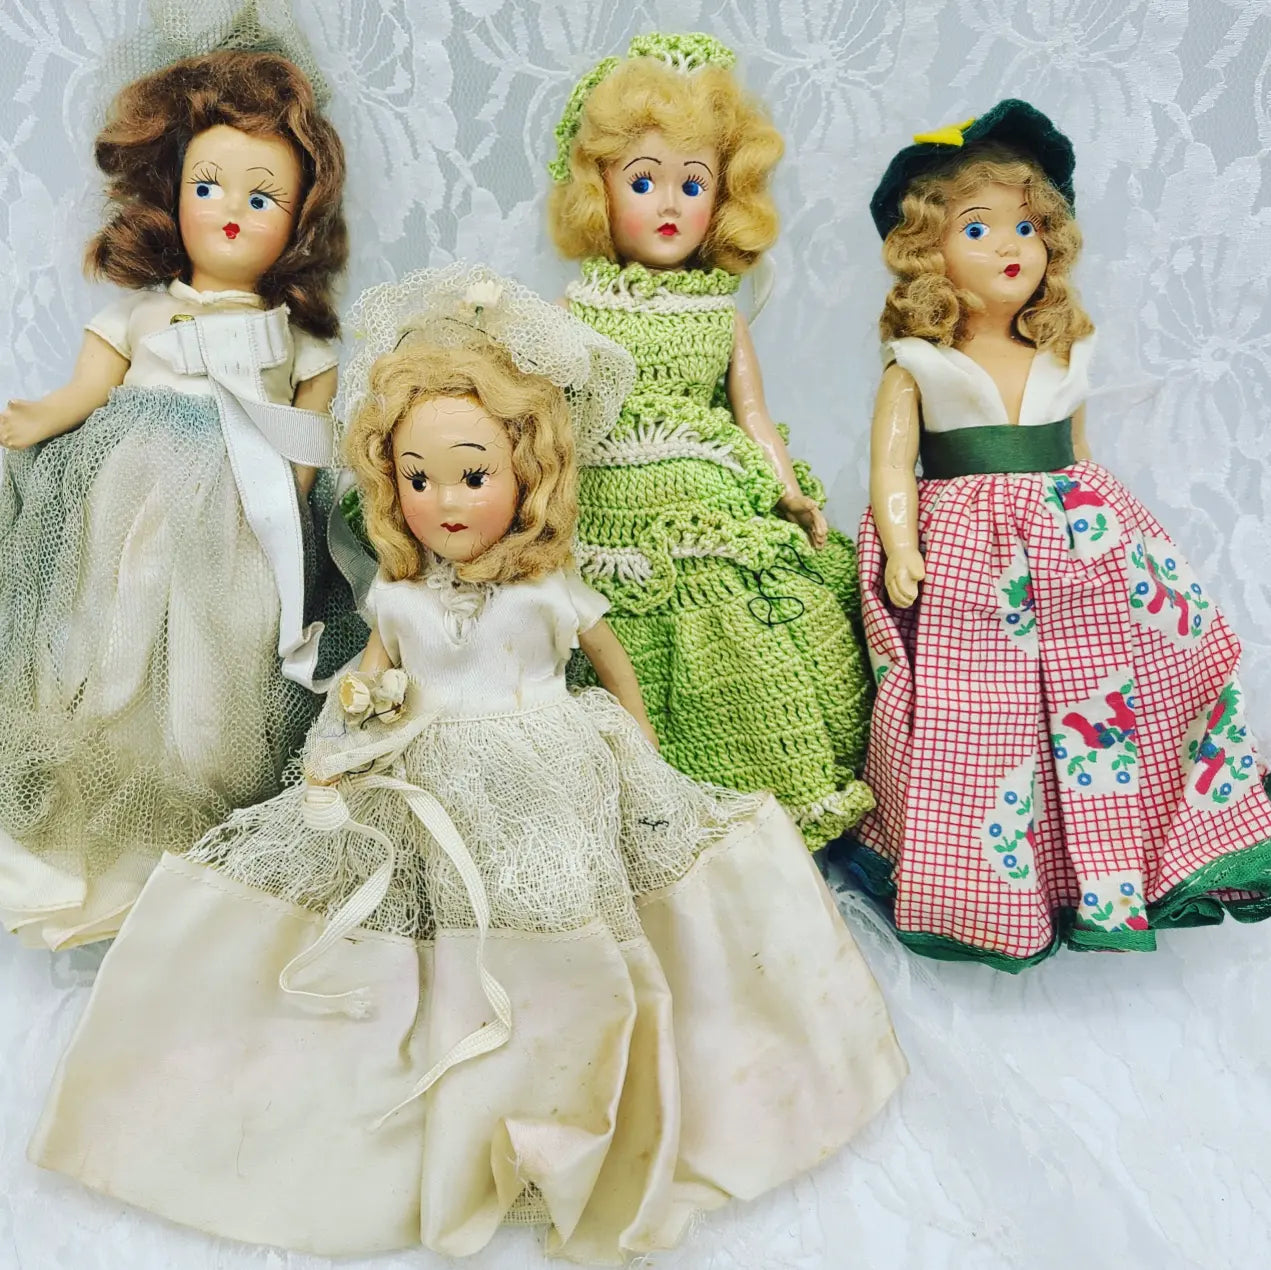 Lot of Four (4) Vintage 1950s Duchess Dolls/ Storybook/Hollywood Dolls 8" Composition/Bisque Dolls